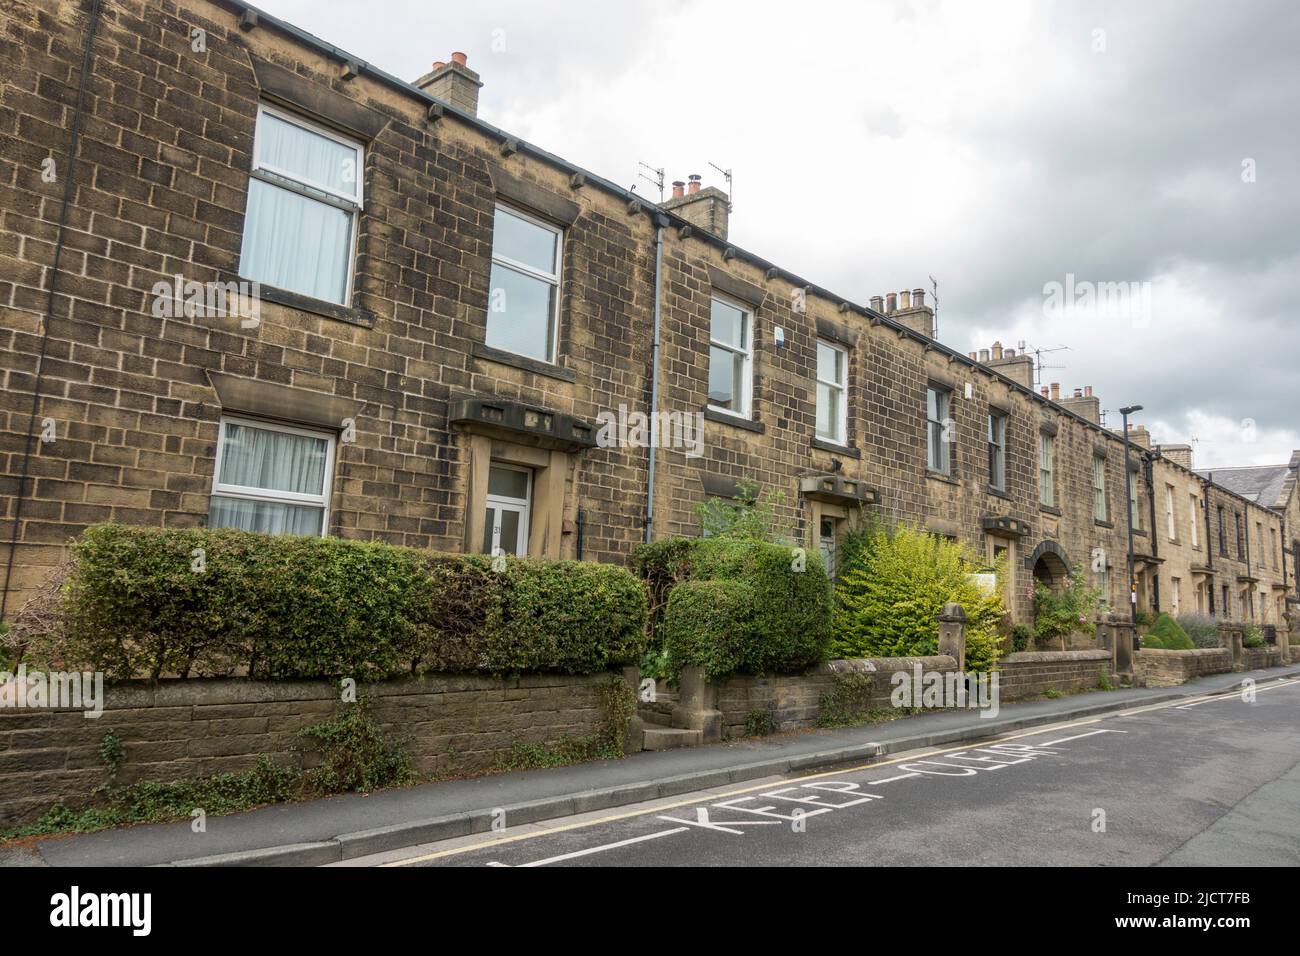 General view of stone cottages on Otley Street in the market town of Skipton, North Yorkshire, UK. Stock Photo